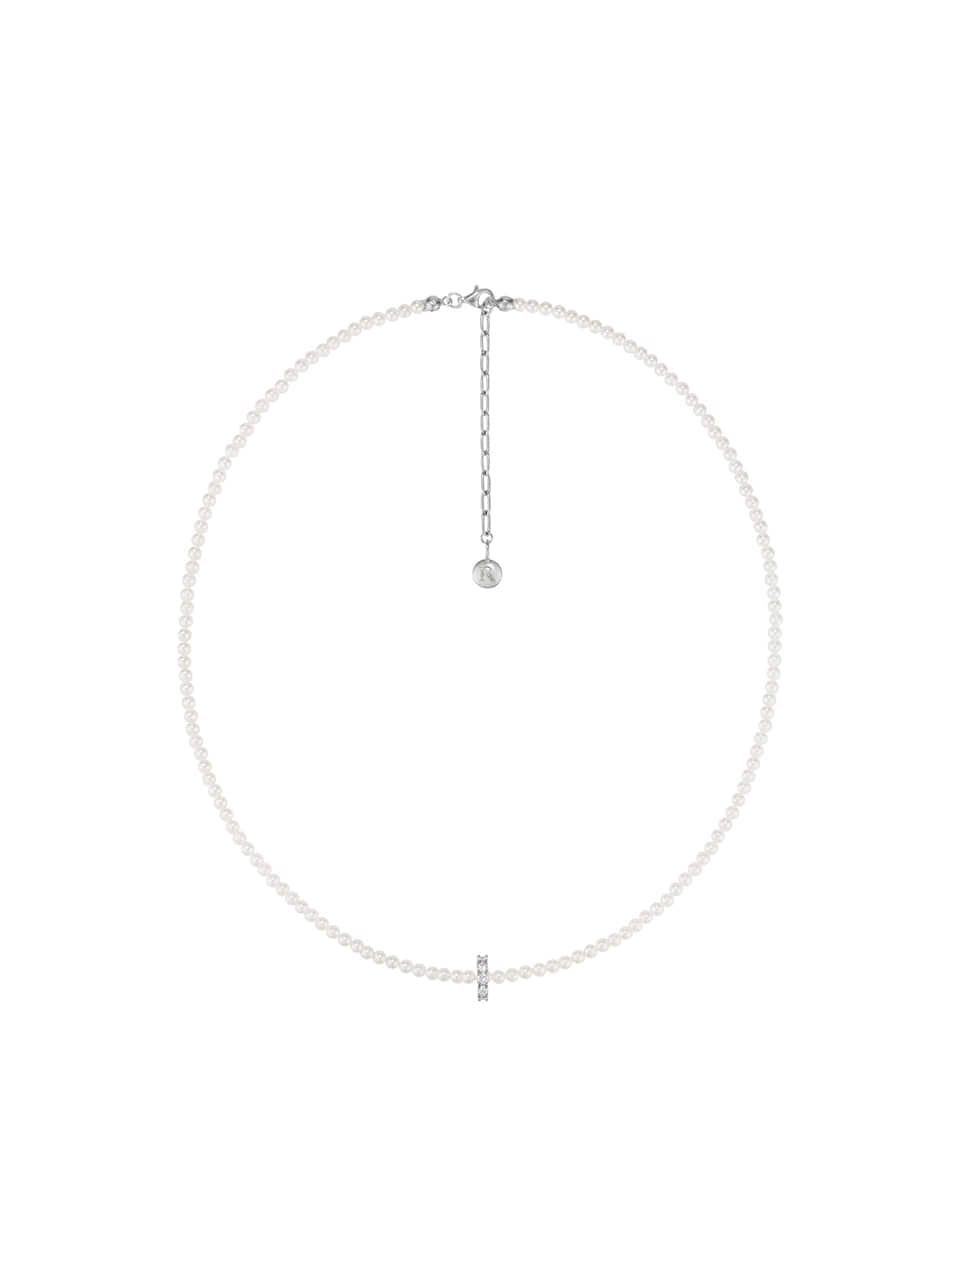 [silver925]Bliss pearl necklace